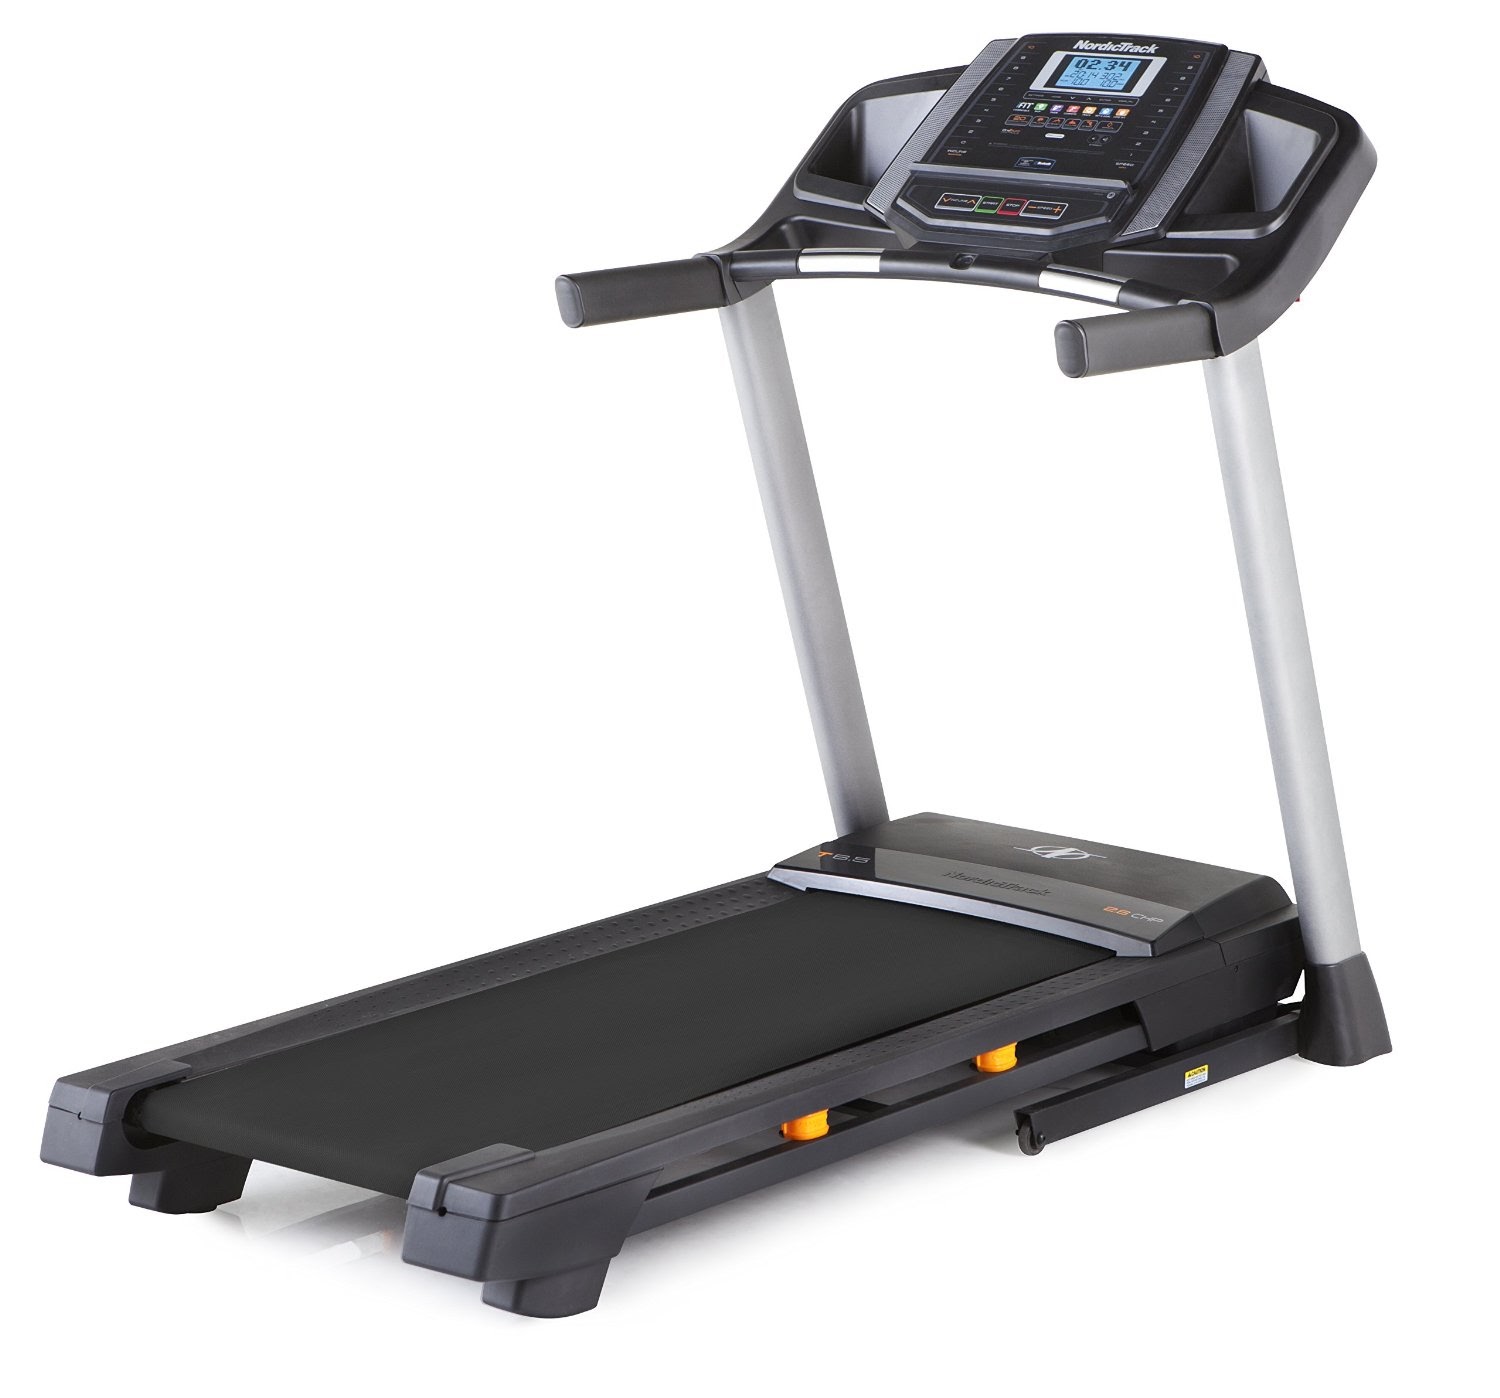 health-fitness-den-nordic-track-t-6-5-s-treadmill-review